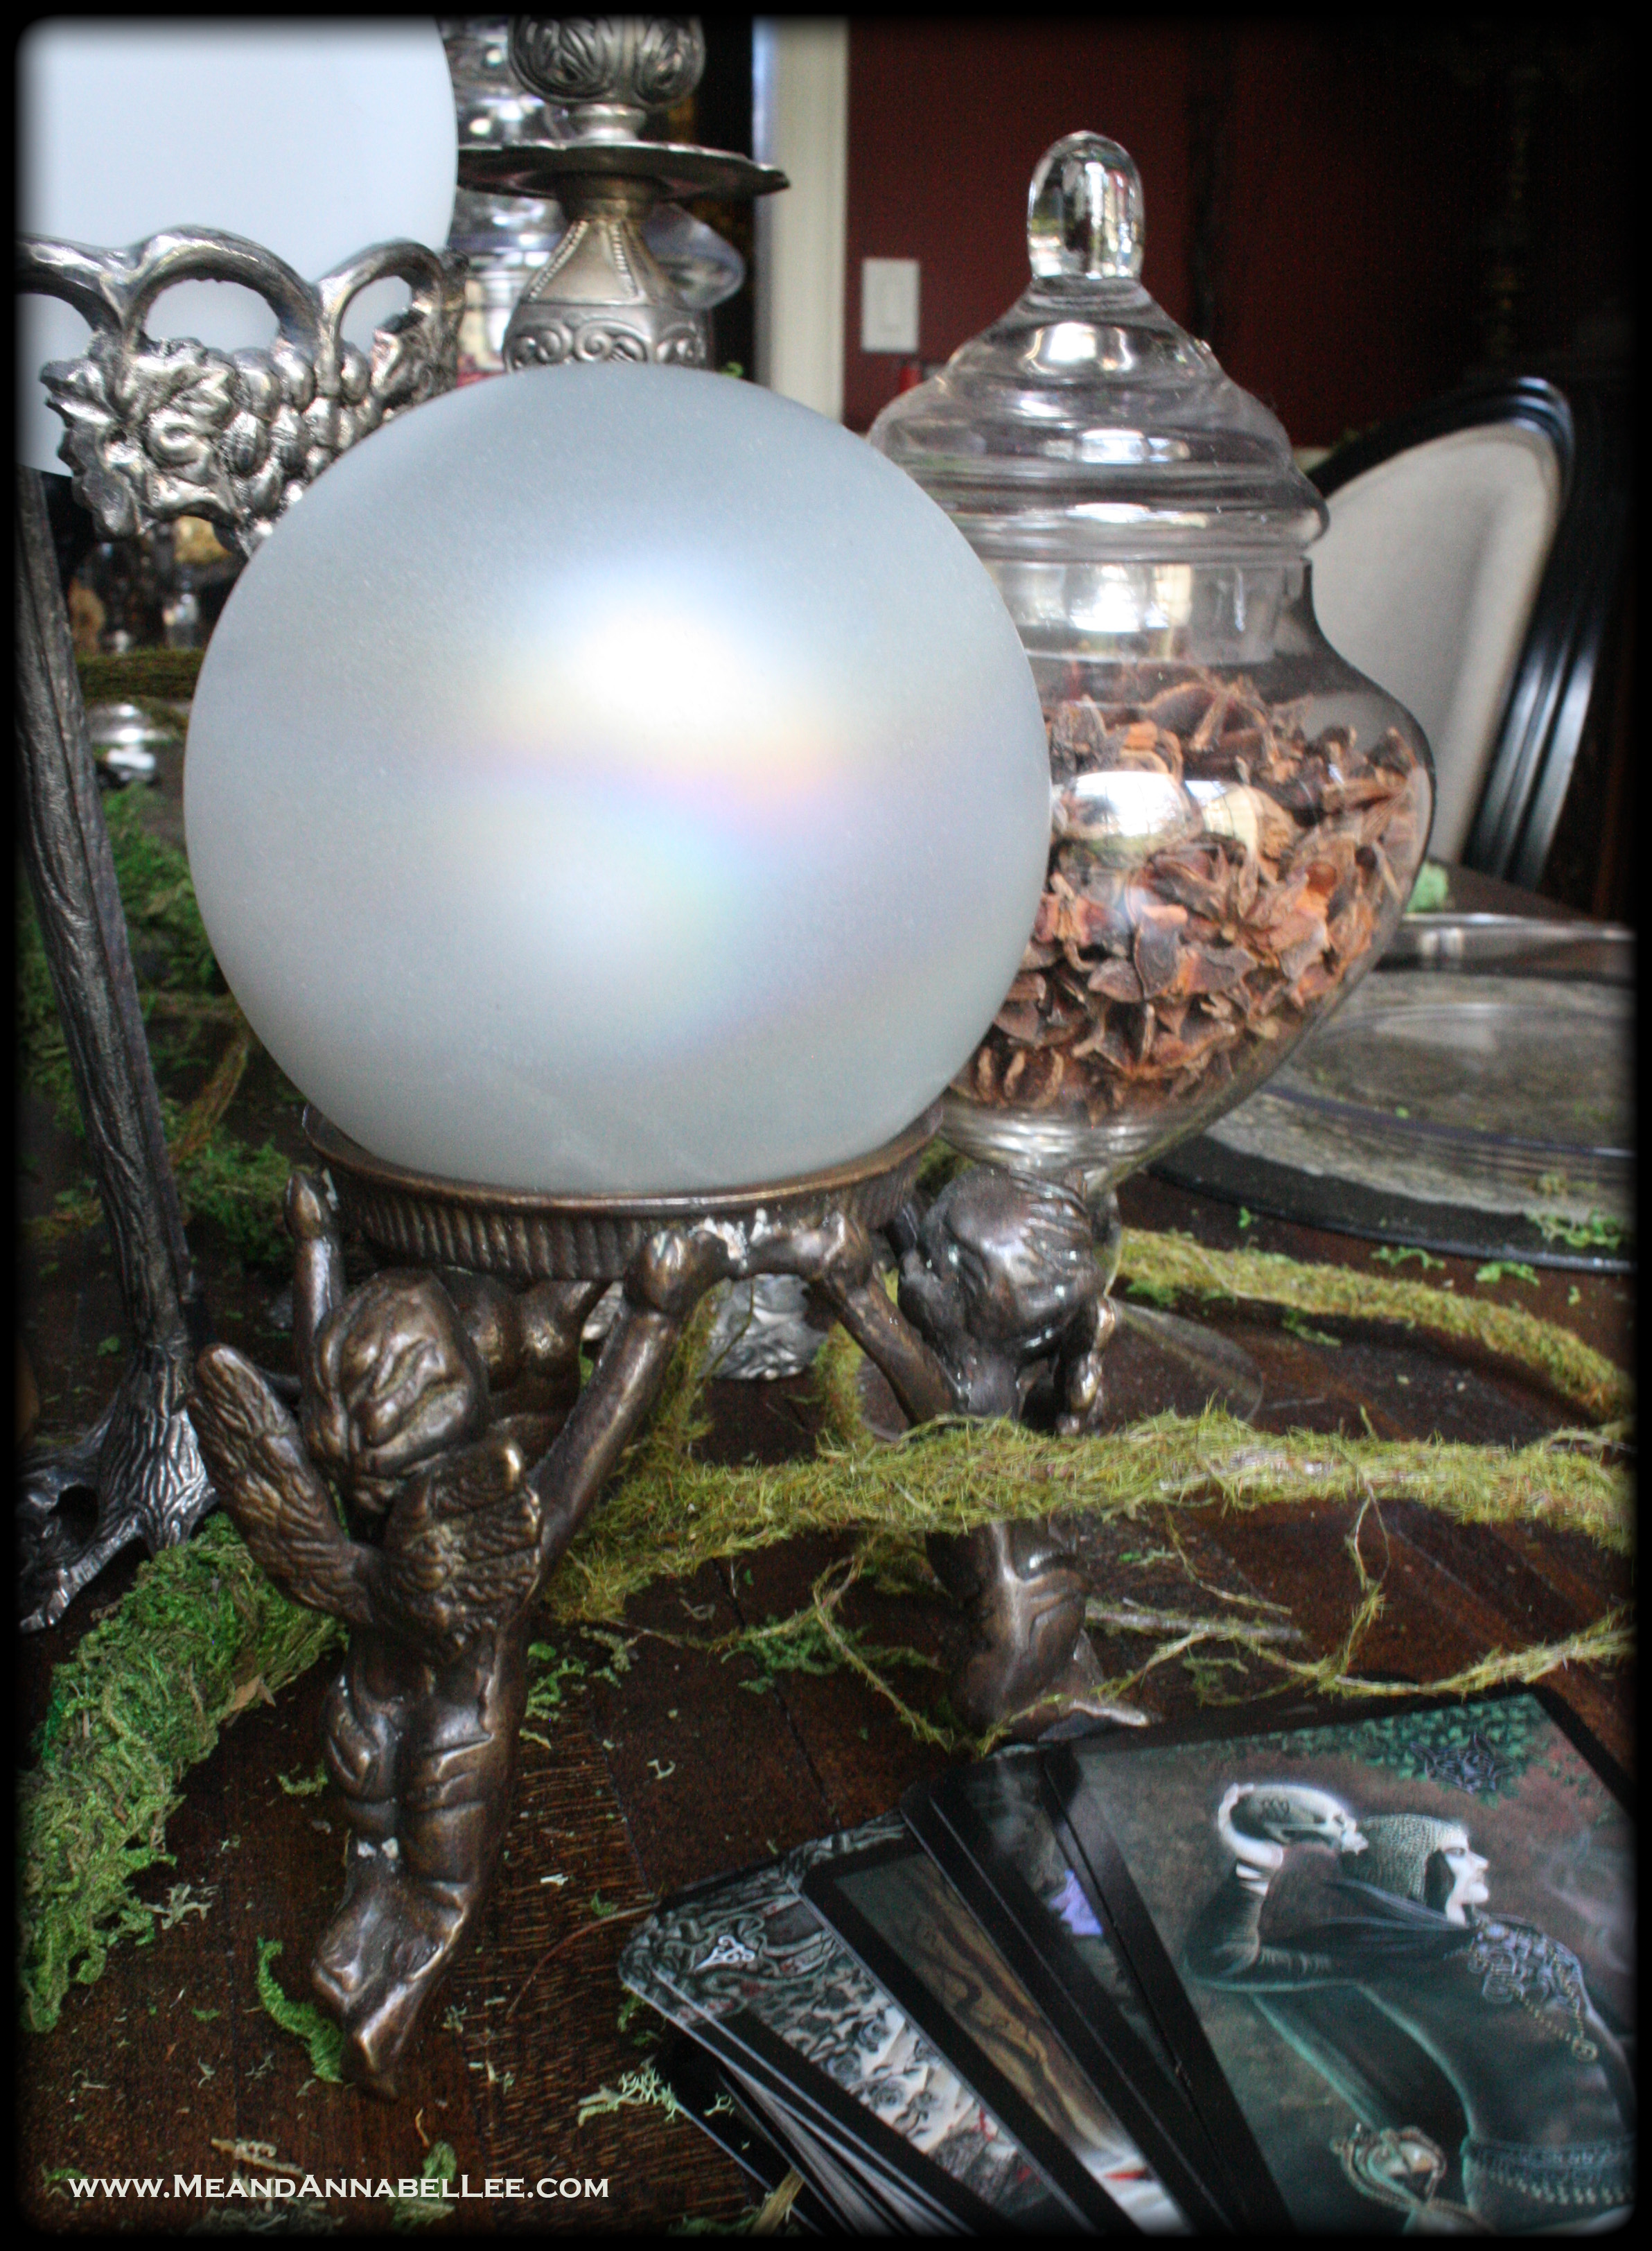 5 Easy Ideas for DIY Crystal Balls | Faux Frosted Glass Tutorial | Halloween Crafts and Decorations | Witches Dinner Party Table Setting | Pagan Fortune Telling | Gazing Balls |www.MeandAnnabelLee.com